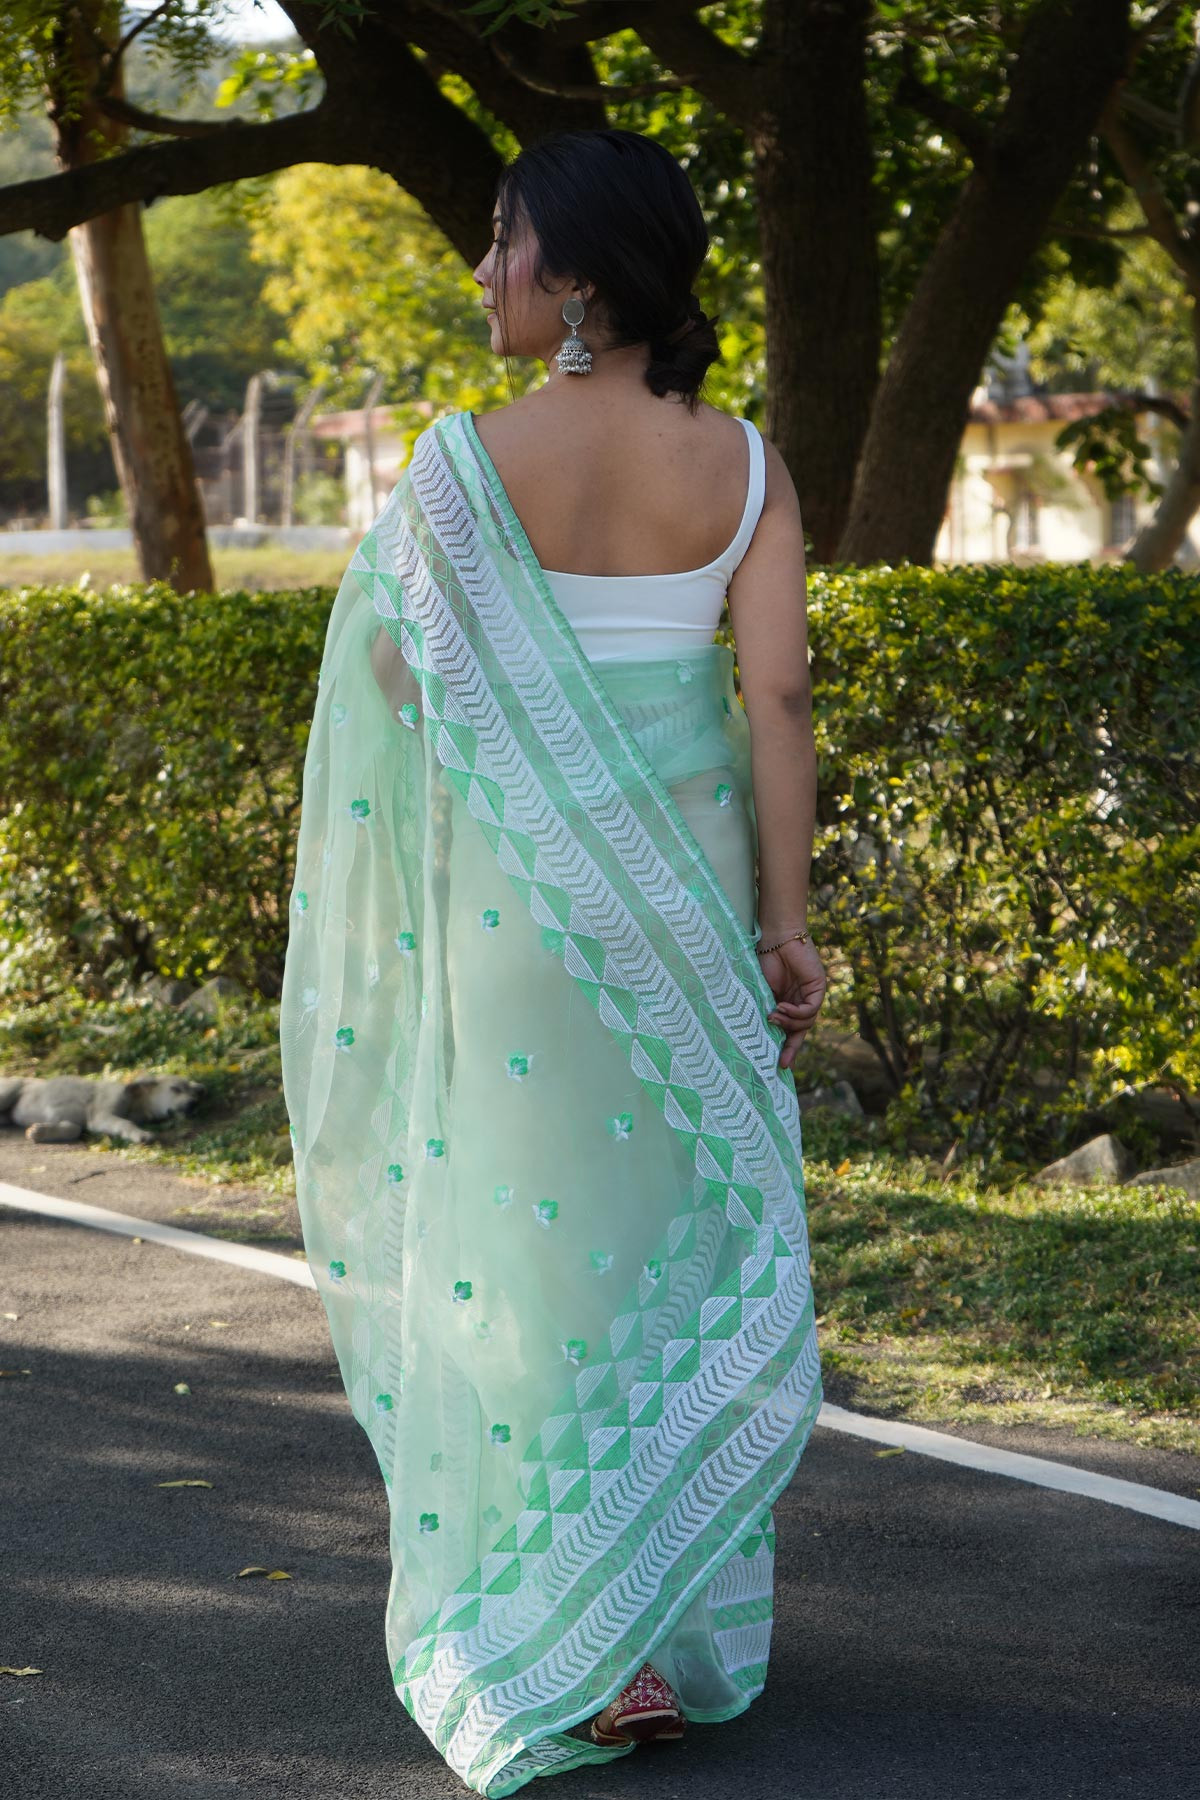 Soft Organza Designer saree with Embroidery Work Border - Turquoise